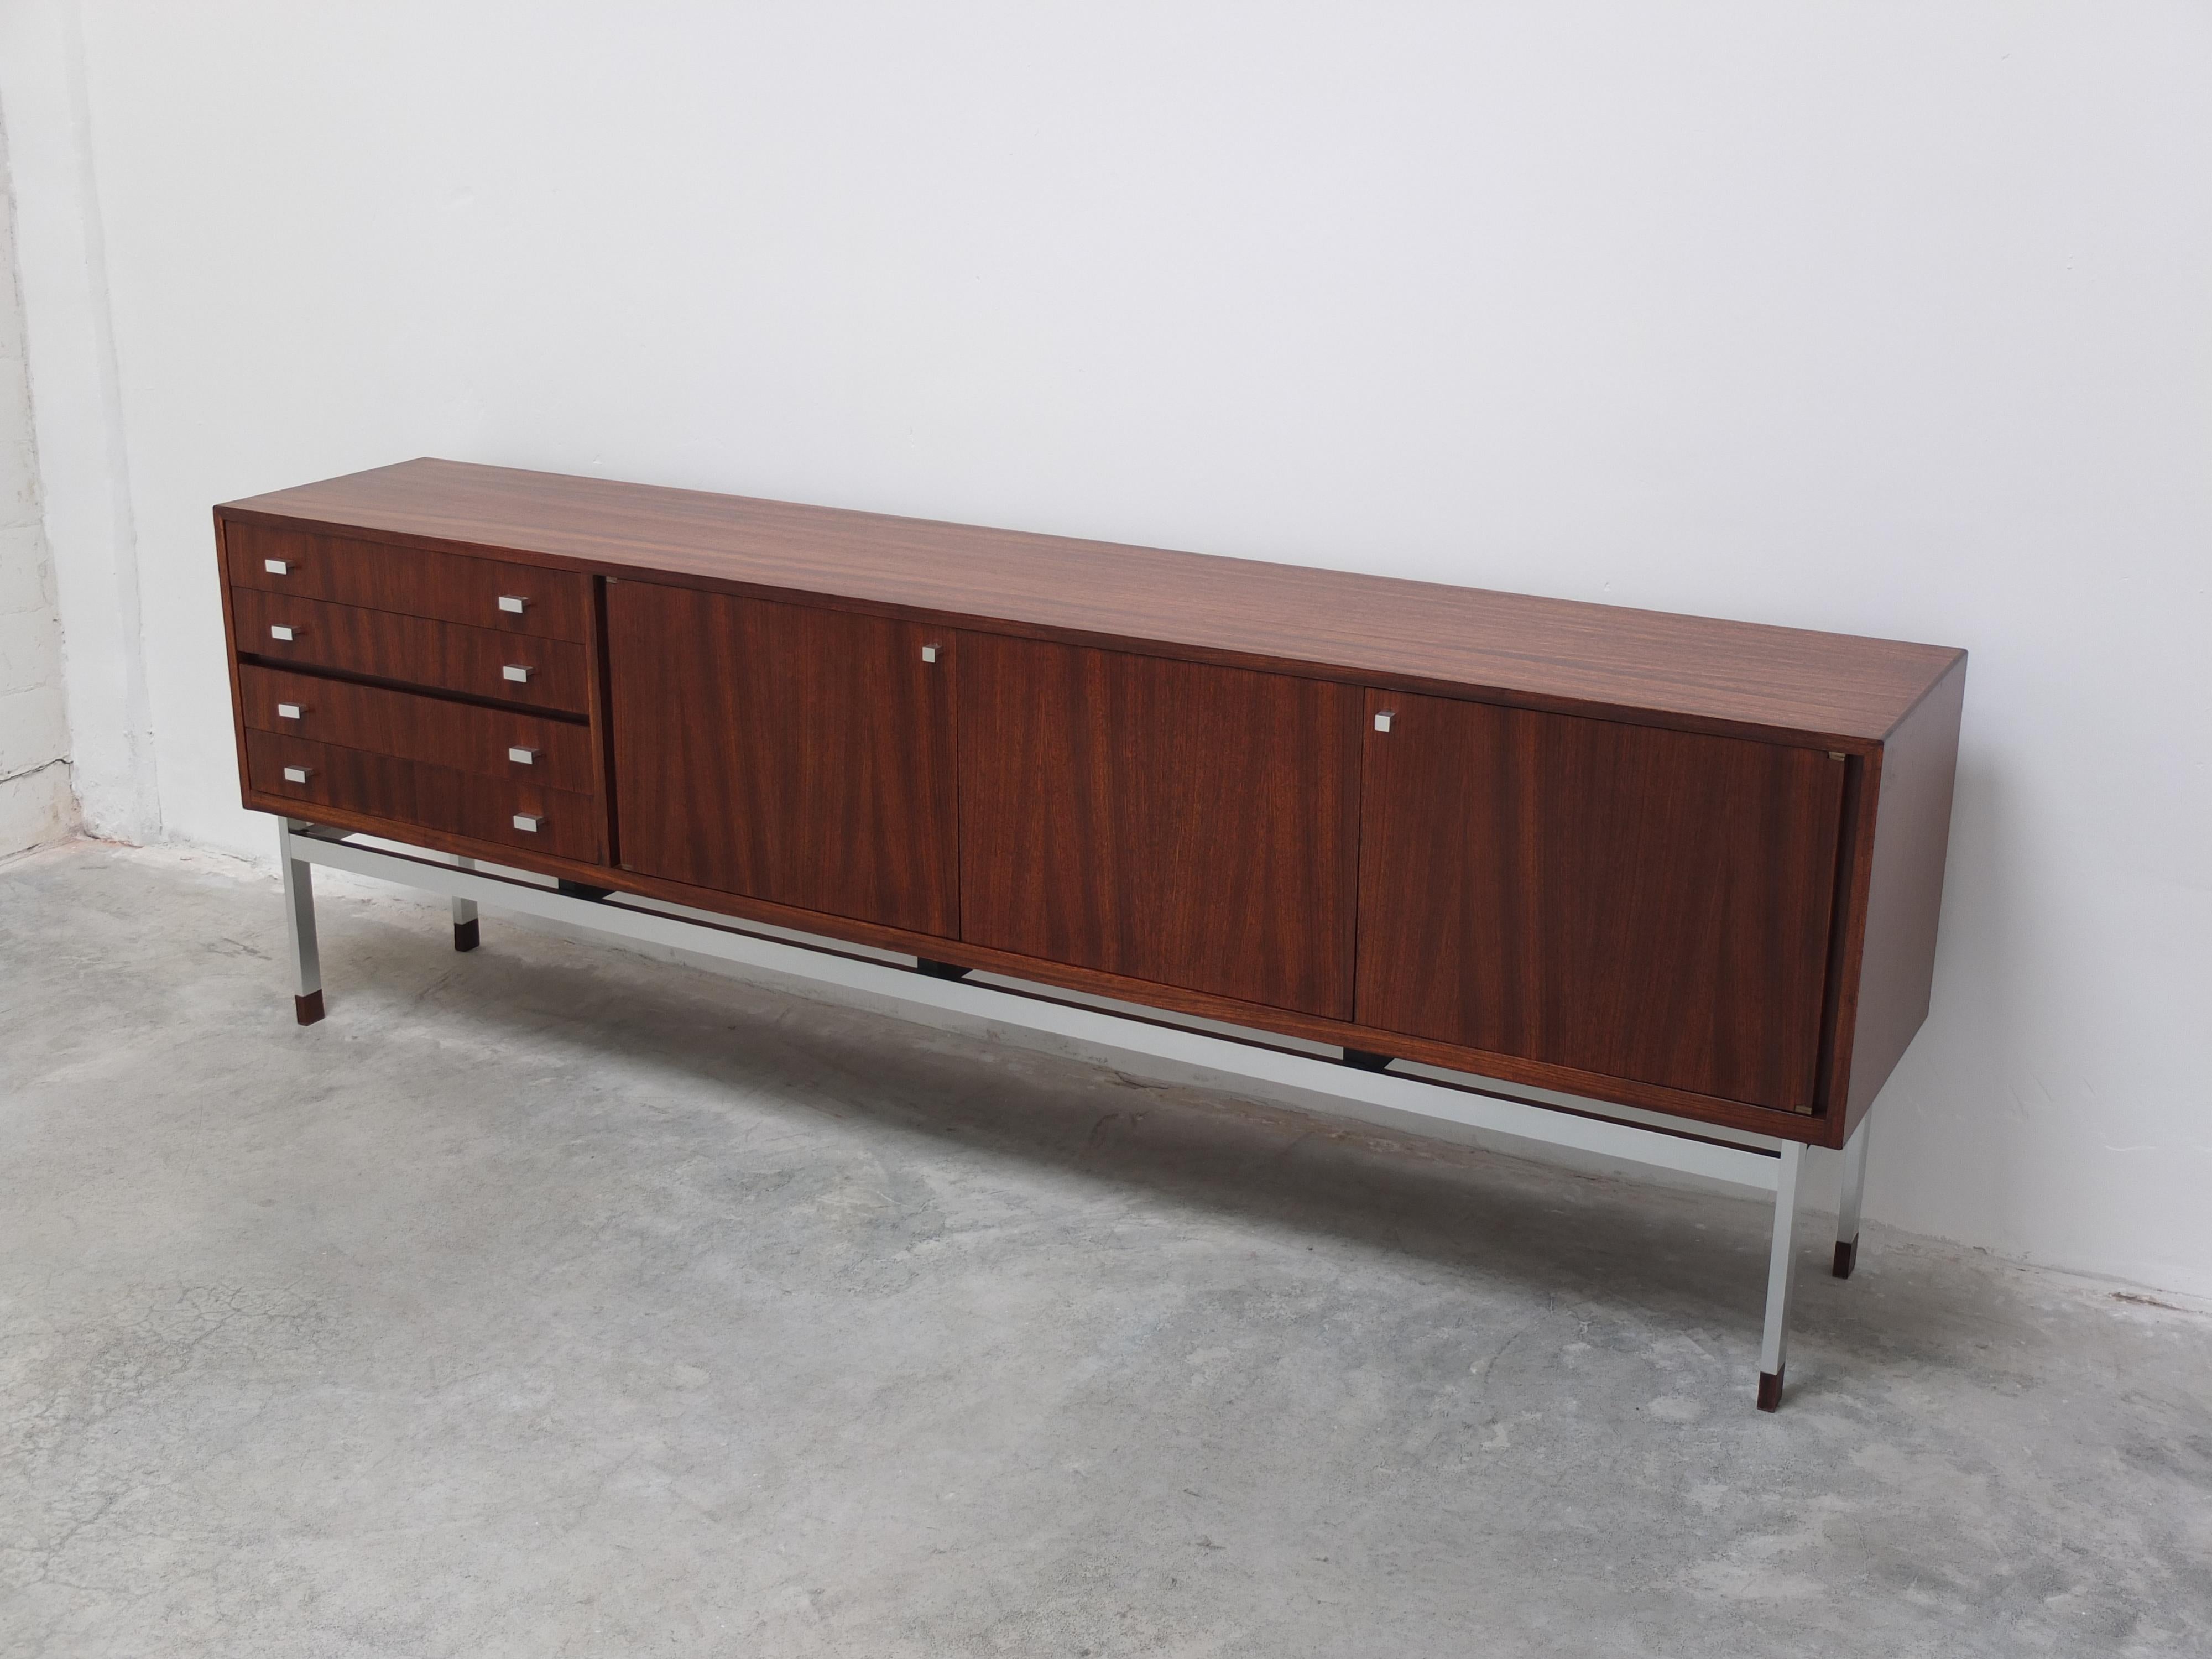 Large sideboard in rosewood designed by Oswald Vermaercke for V-Form during the 1960s. This design is not common and has a very modernist feel to it thanks to the subtle use of metal whereas most other models by Vermaercke are all wood. Another